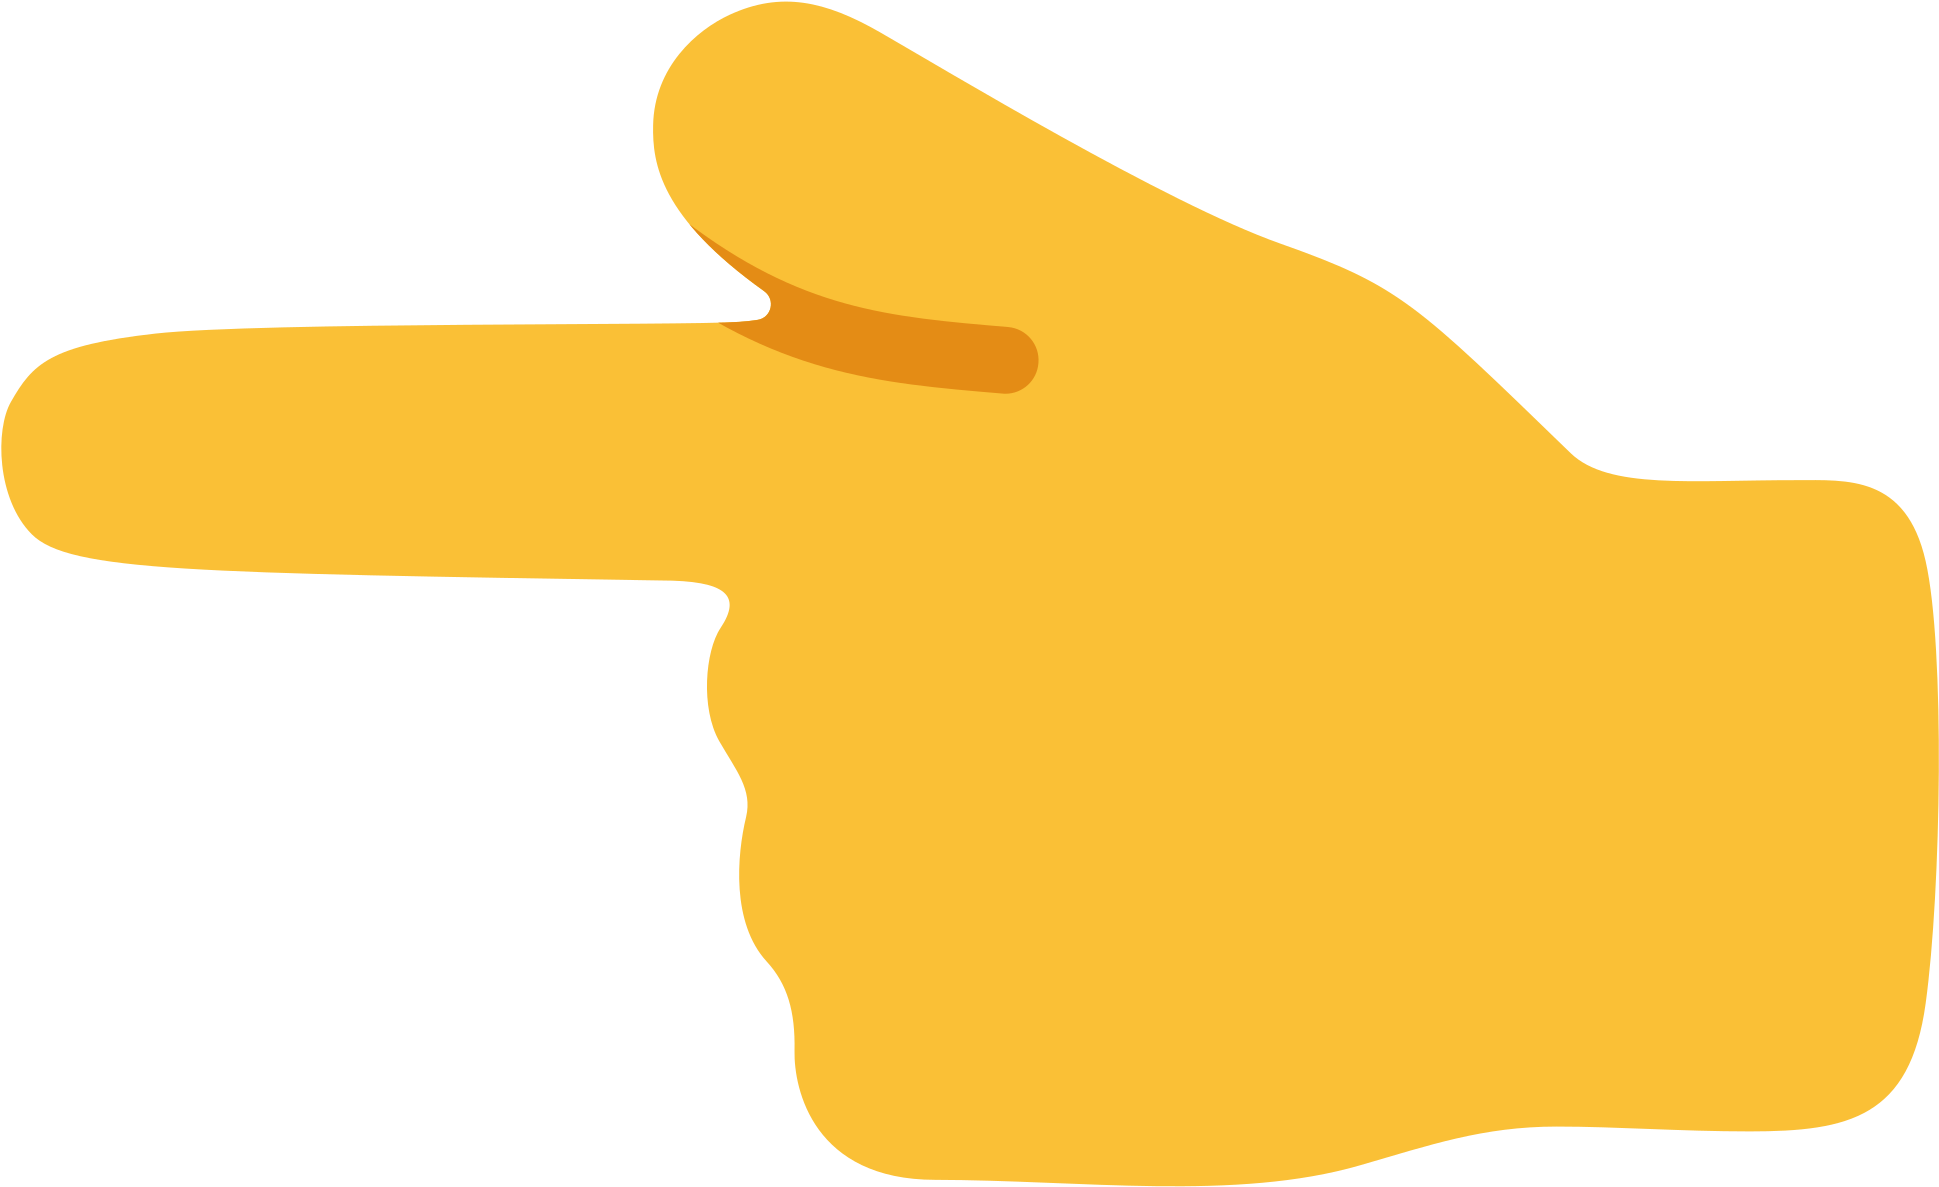 Raised Hand With Fingers Splayed Emoji Source - Hand Emoji Png File (2000x2000), Png Download